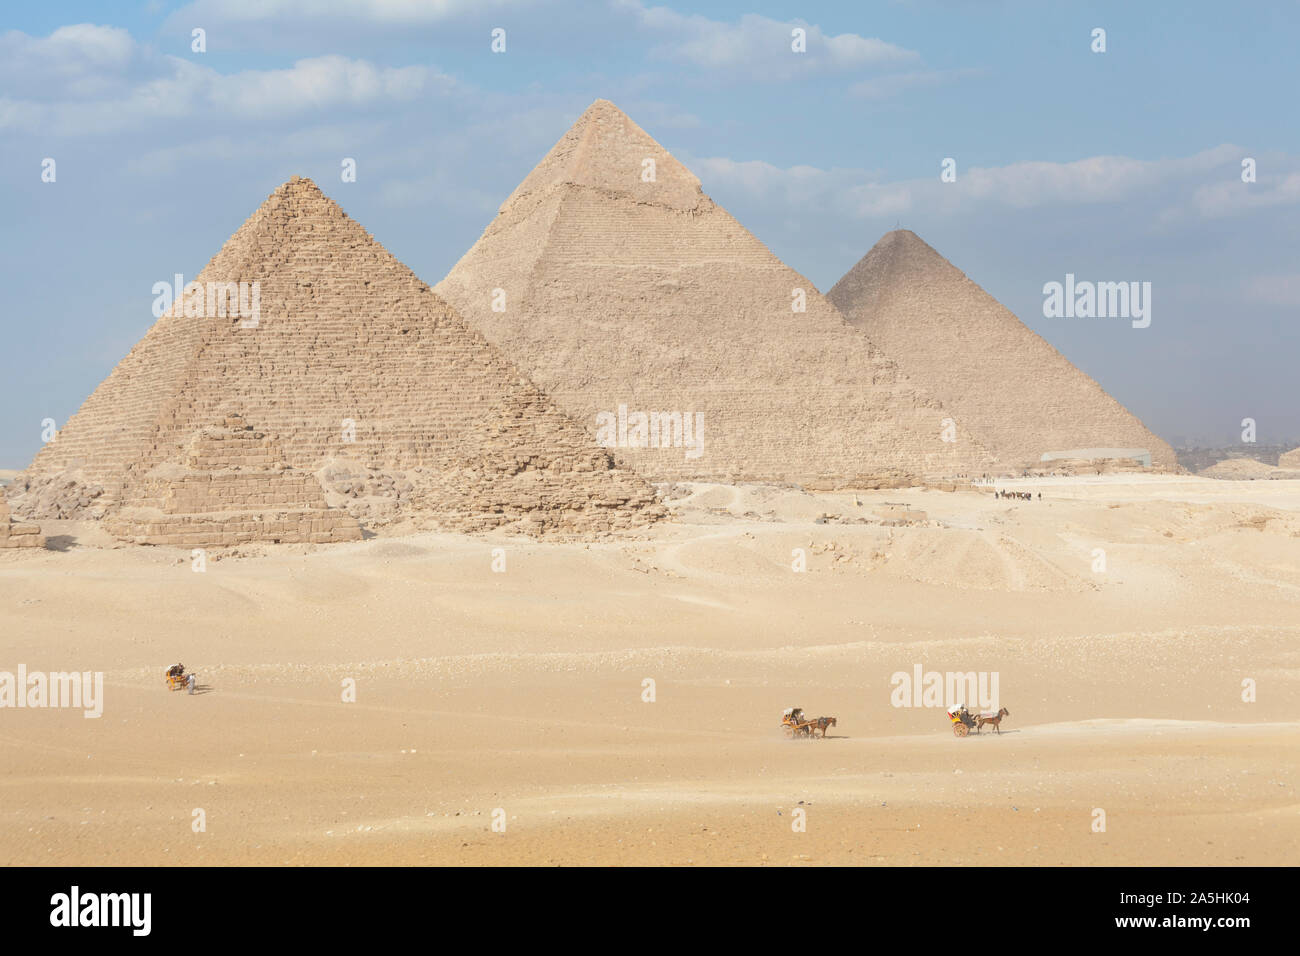 Egypt, Giza, the great Pyramids at Giza with horse drawn carts in the distance. Stock Photo